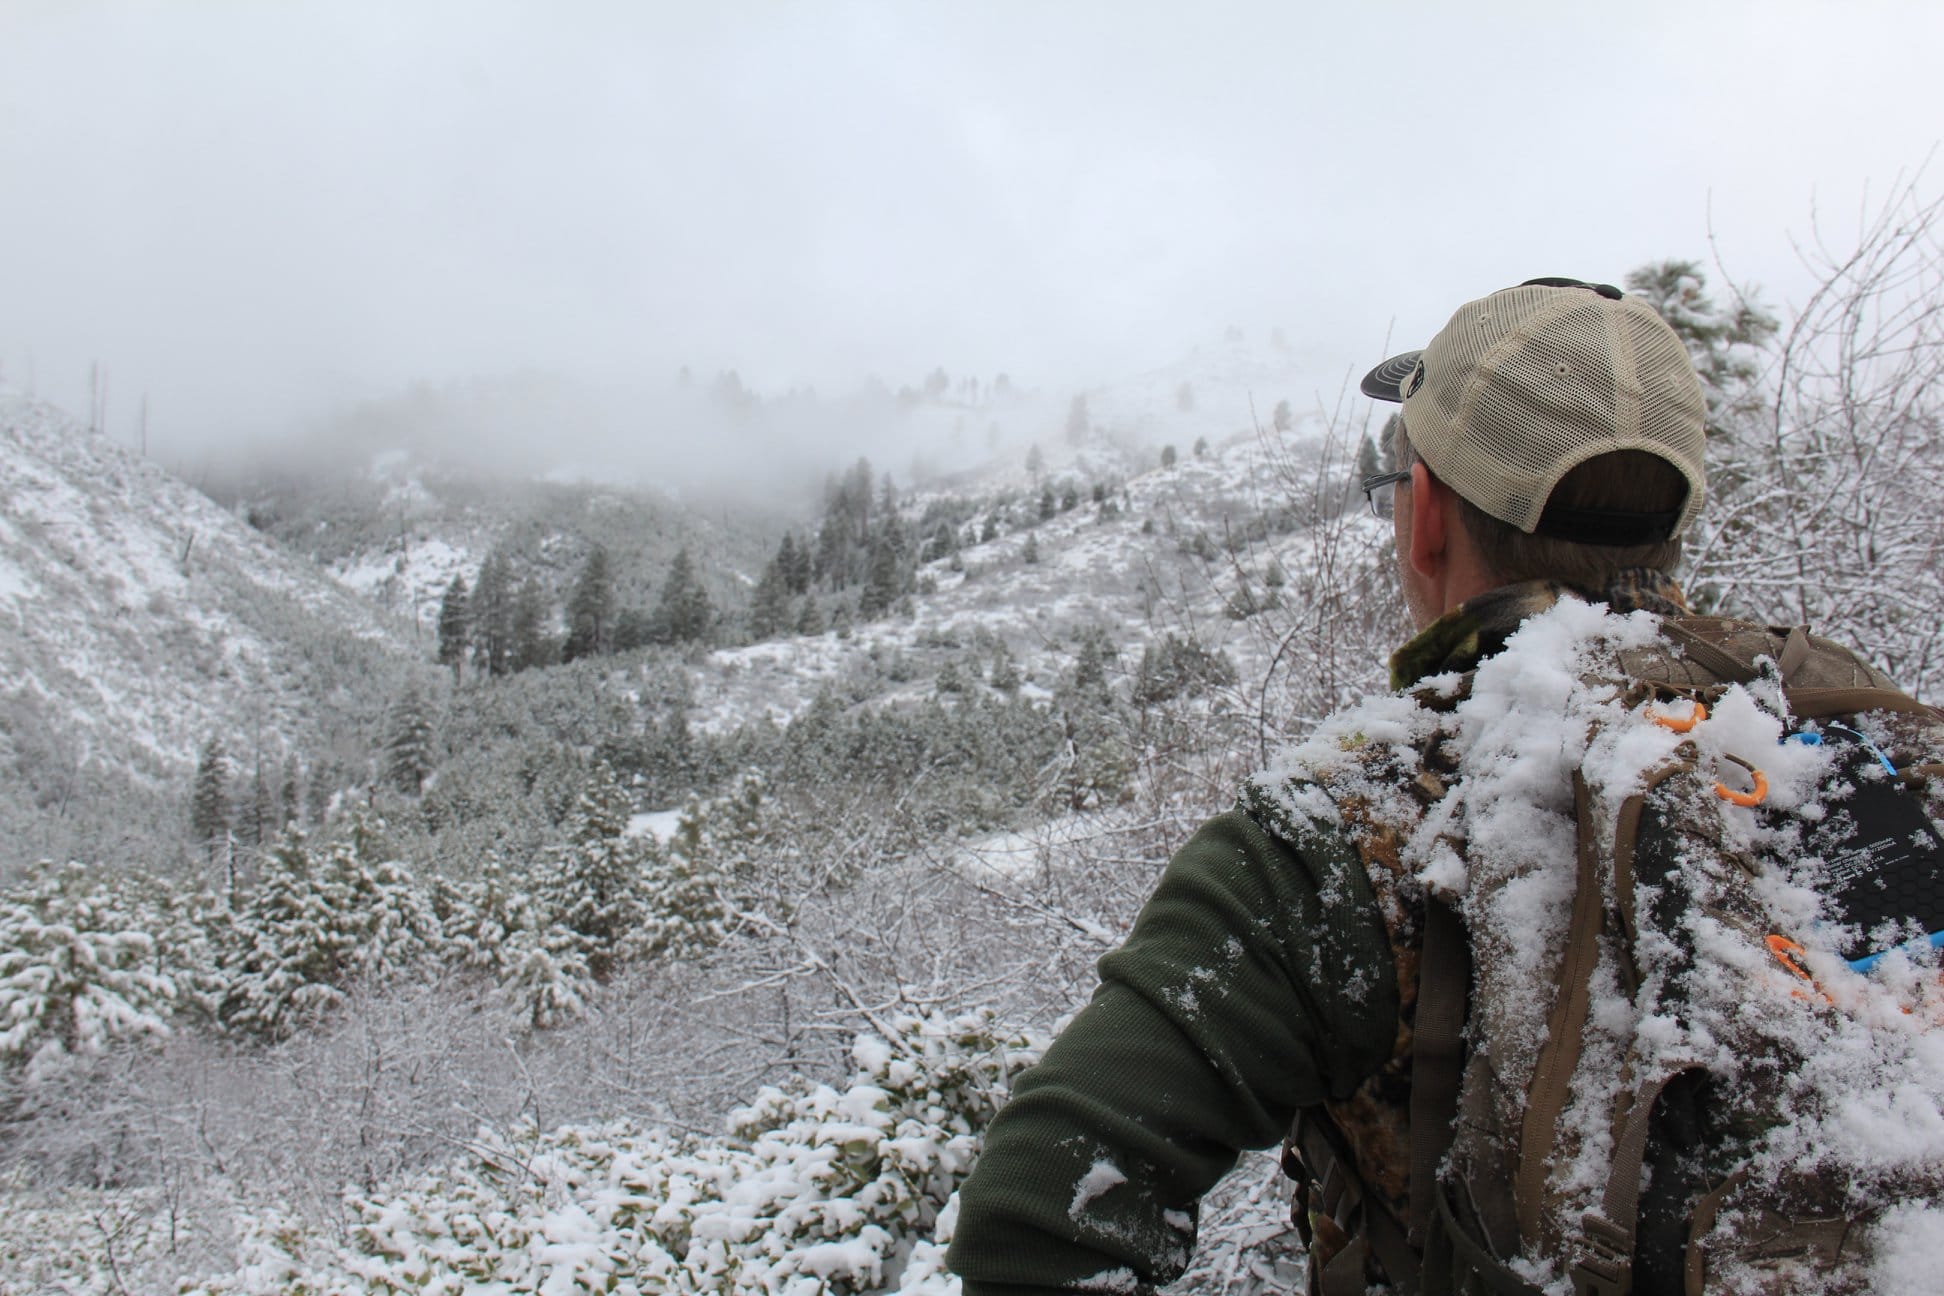 One of our hunters glassing for wolves in Idaho.